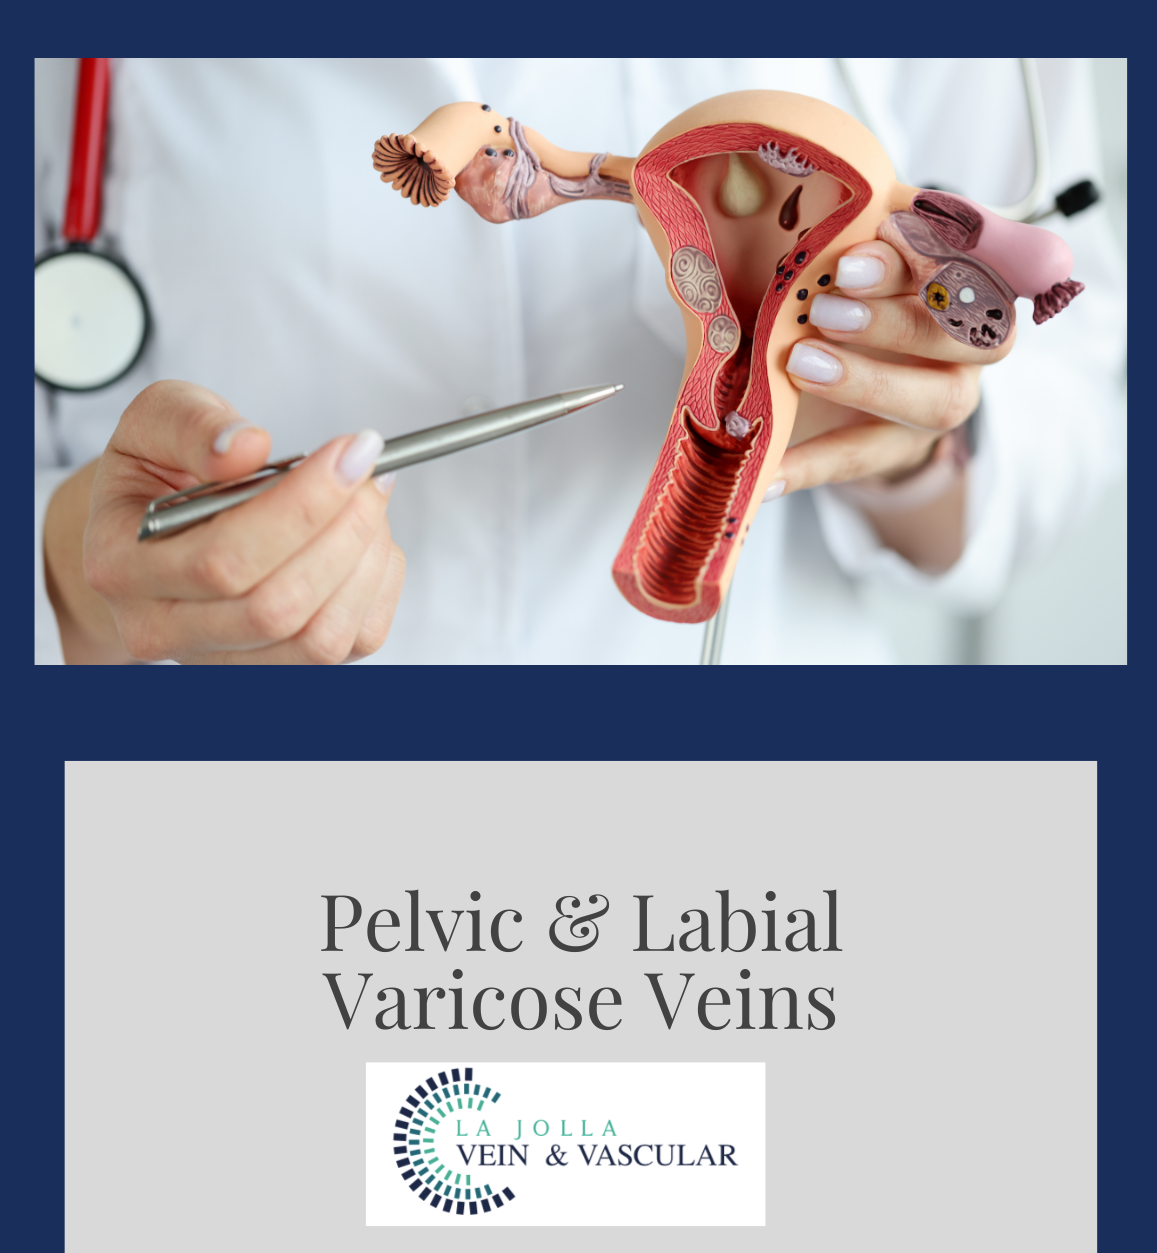 Interventional Radiology Group - Pelvic Vein Embolization is an effective  treatment for Pelvic Congestion Syndrome in Women! Pelvic congestion  syndrome occurs when pelvic veins become swollen and painful due to low  blood